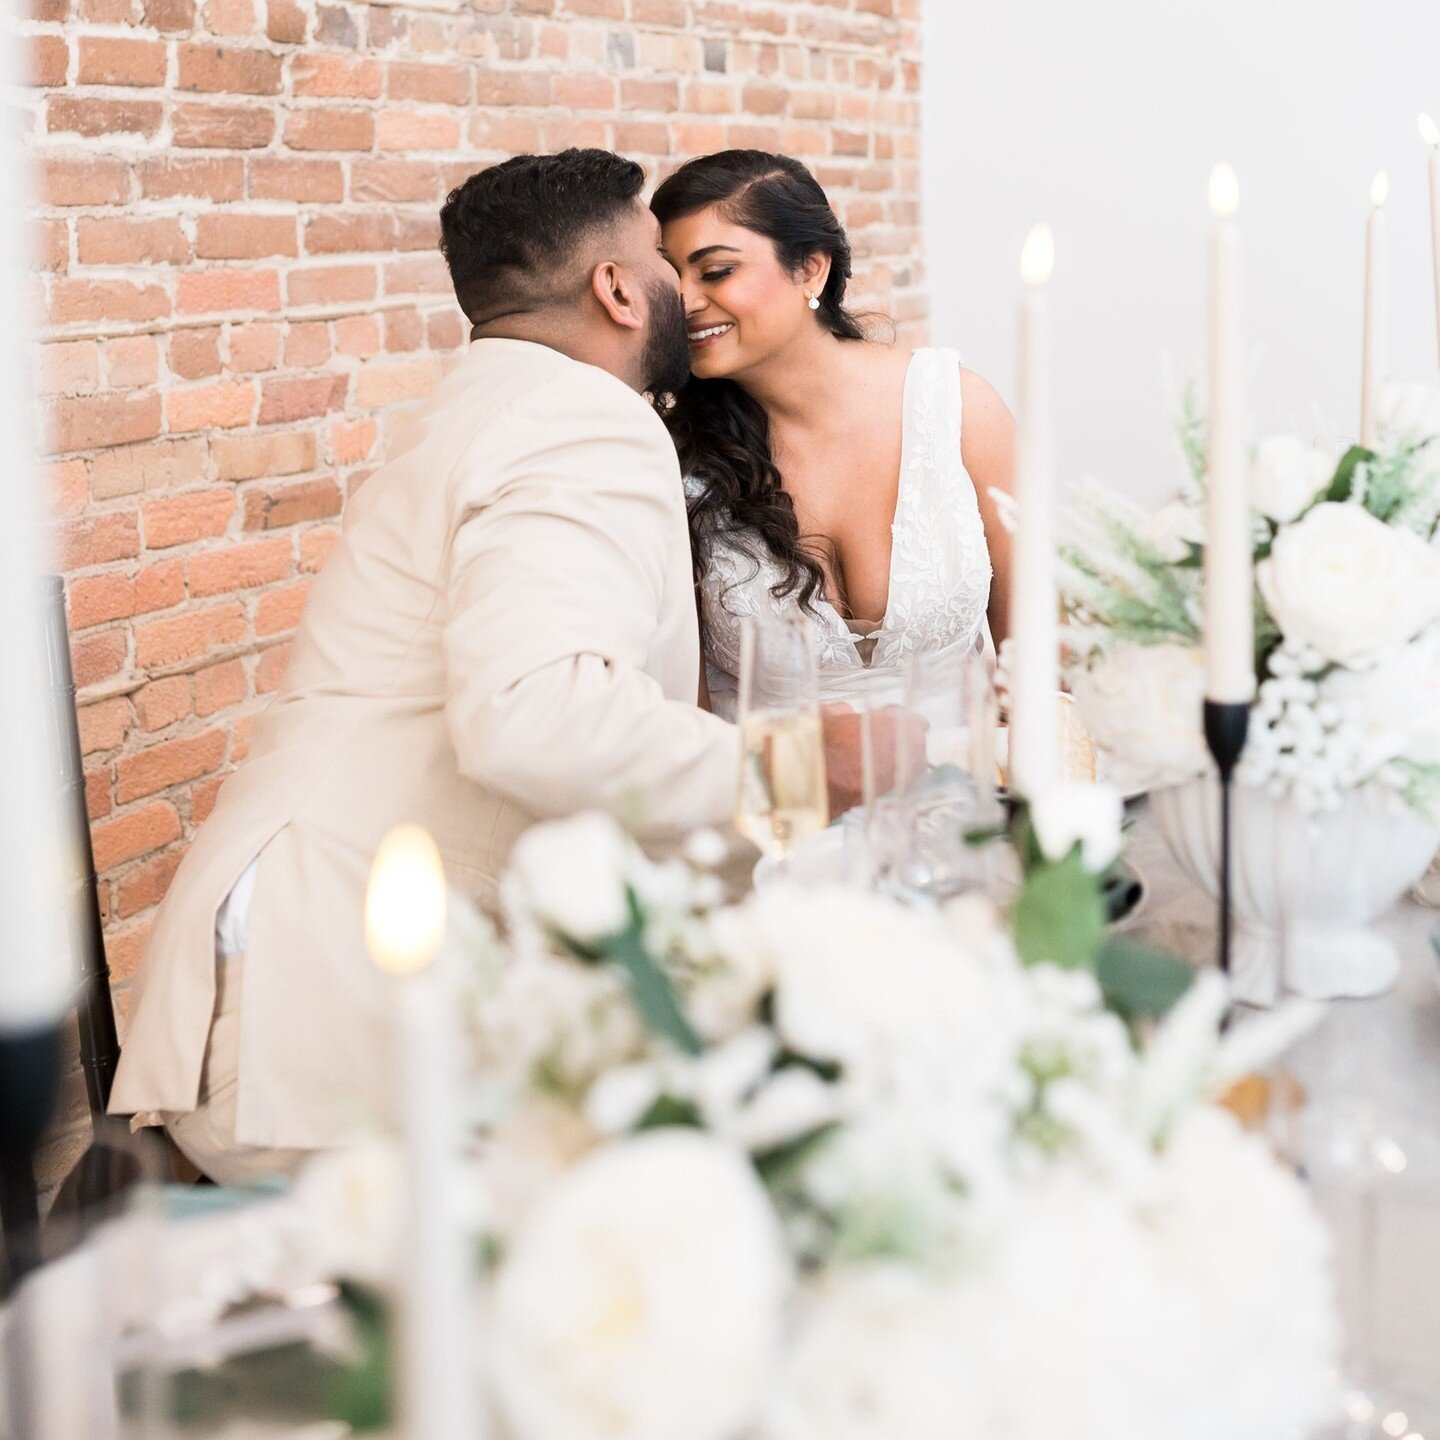 Another favorite and a shoutout to these vendors who made this shoot an absolute dream

Venue: @theeliawilmington
Photography: @thestorycreative 
Florals: @fauxreal_wilmington 
Wedding Cake: @imaginarycakes 
Planning: @brittanieraquelevents 
Beauty: 